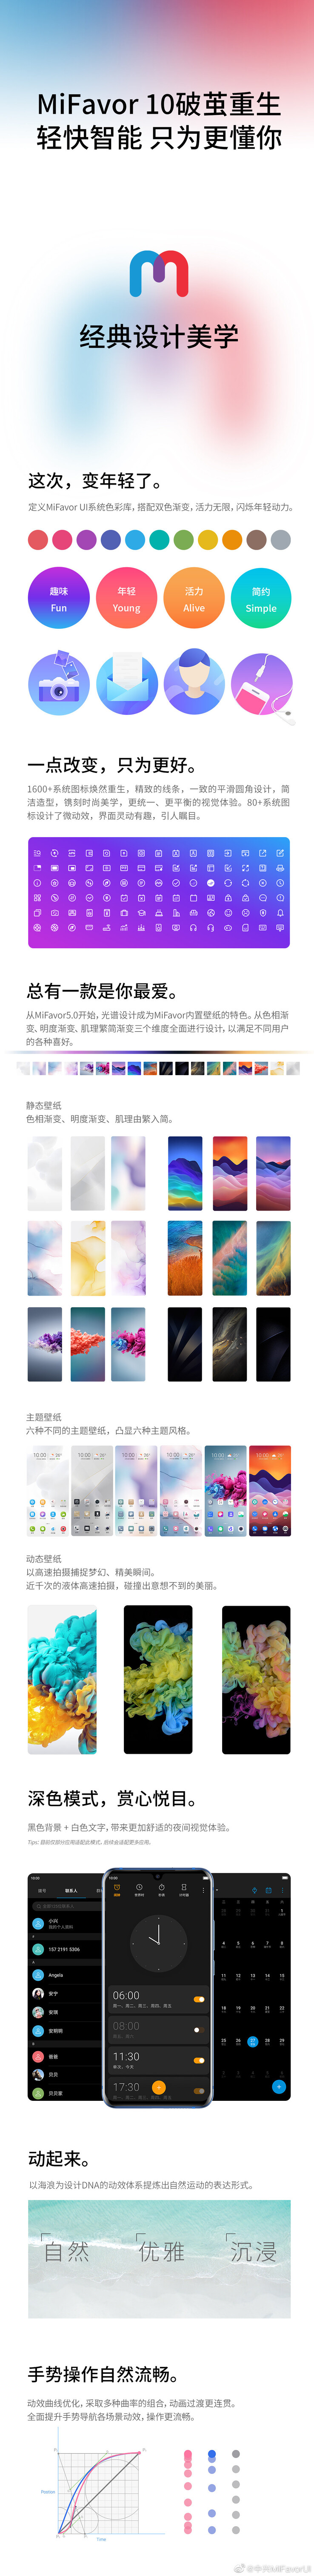 The full gamut of MiFavor 10 features. (Source: Weibo)